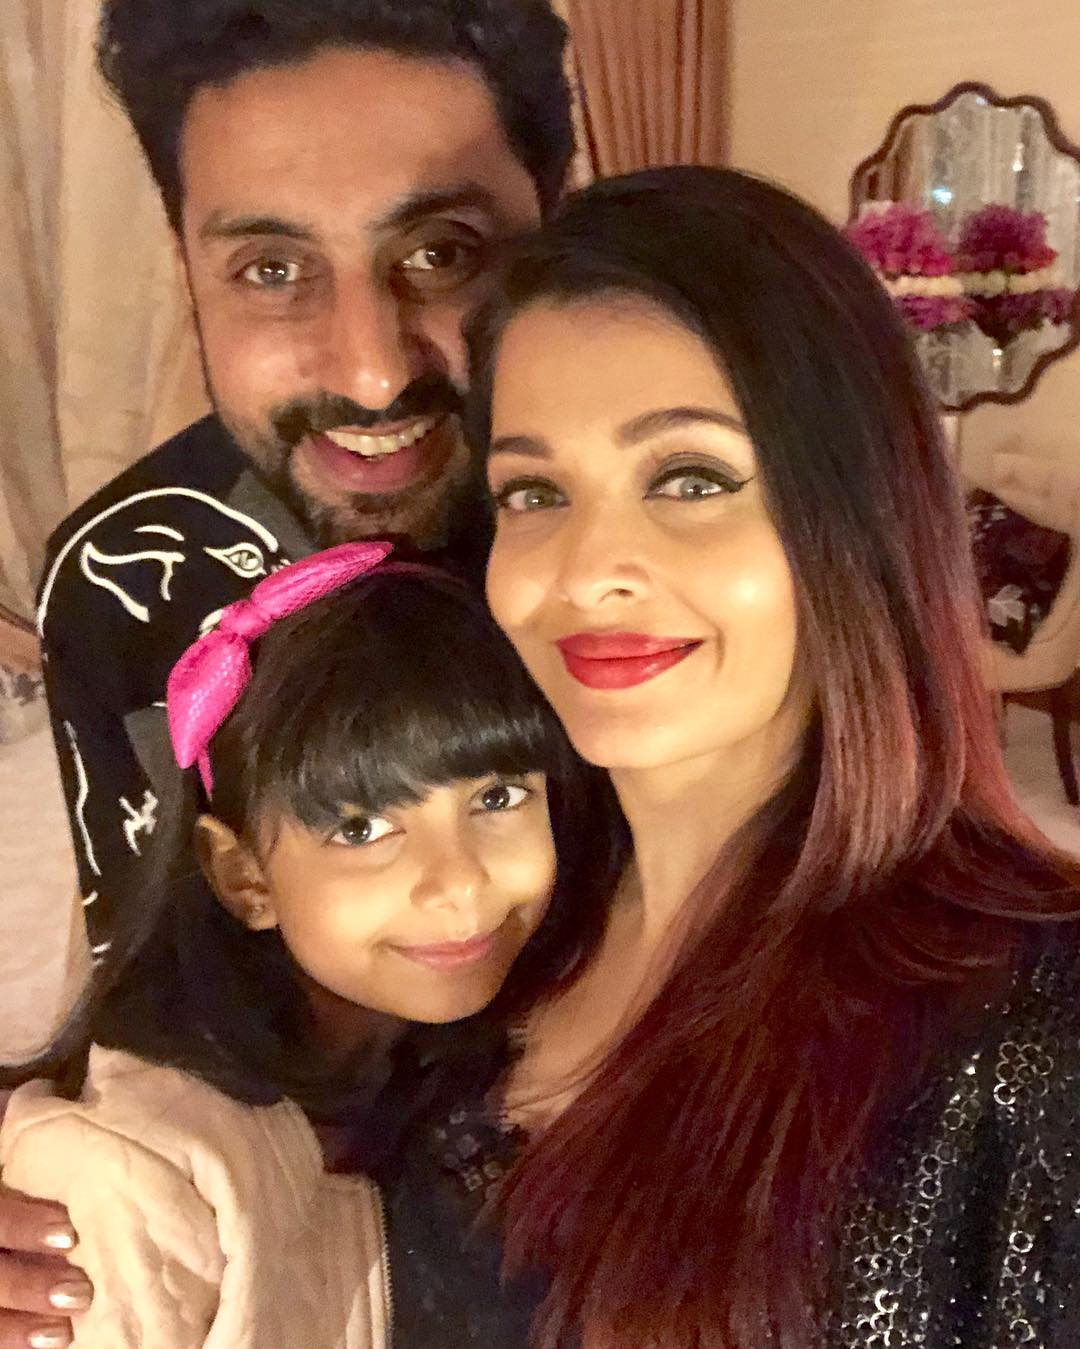 Aishwarya Rai Bachchan gives up partying with SRK for daughter Aaradhya